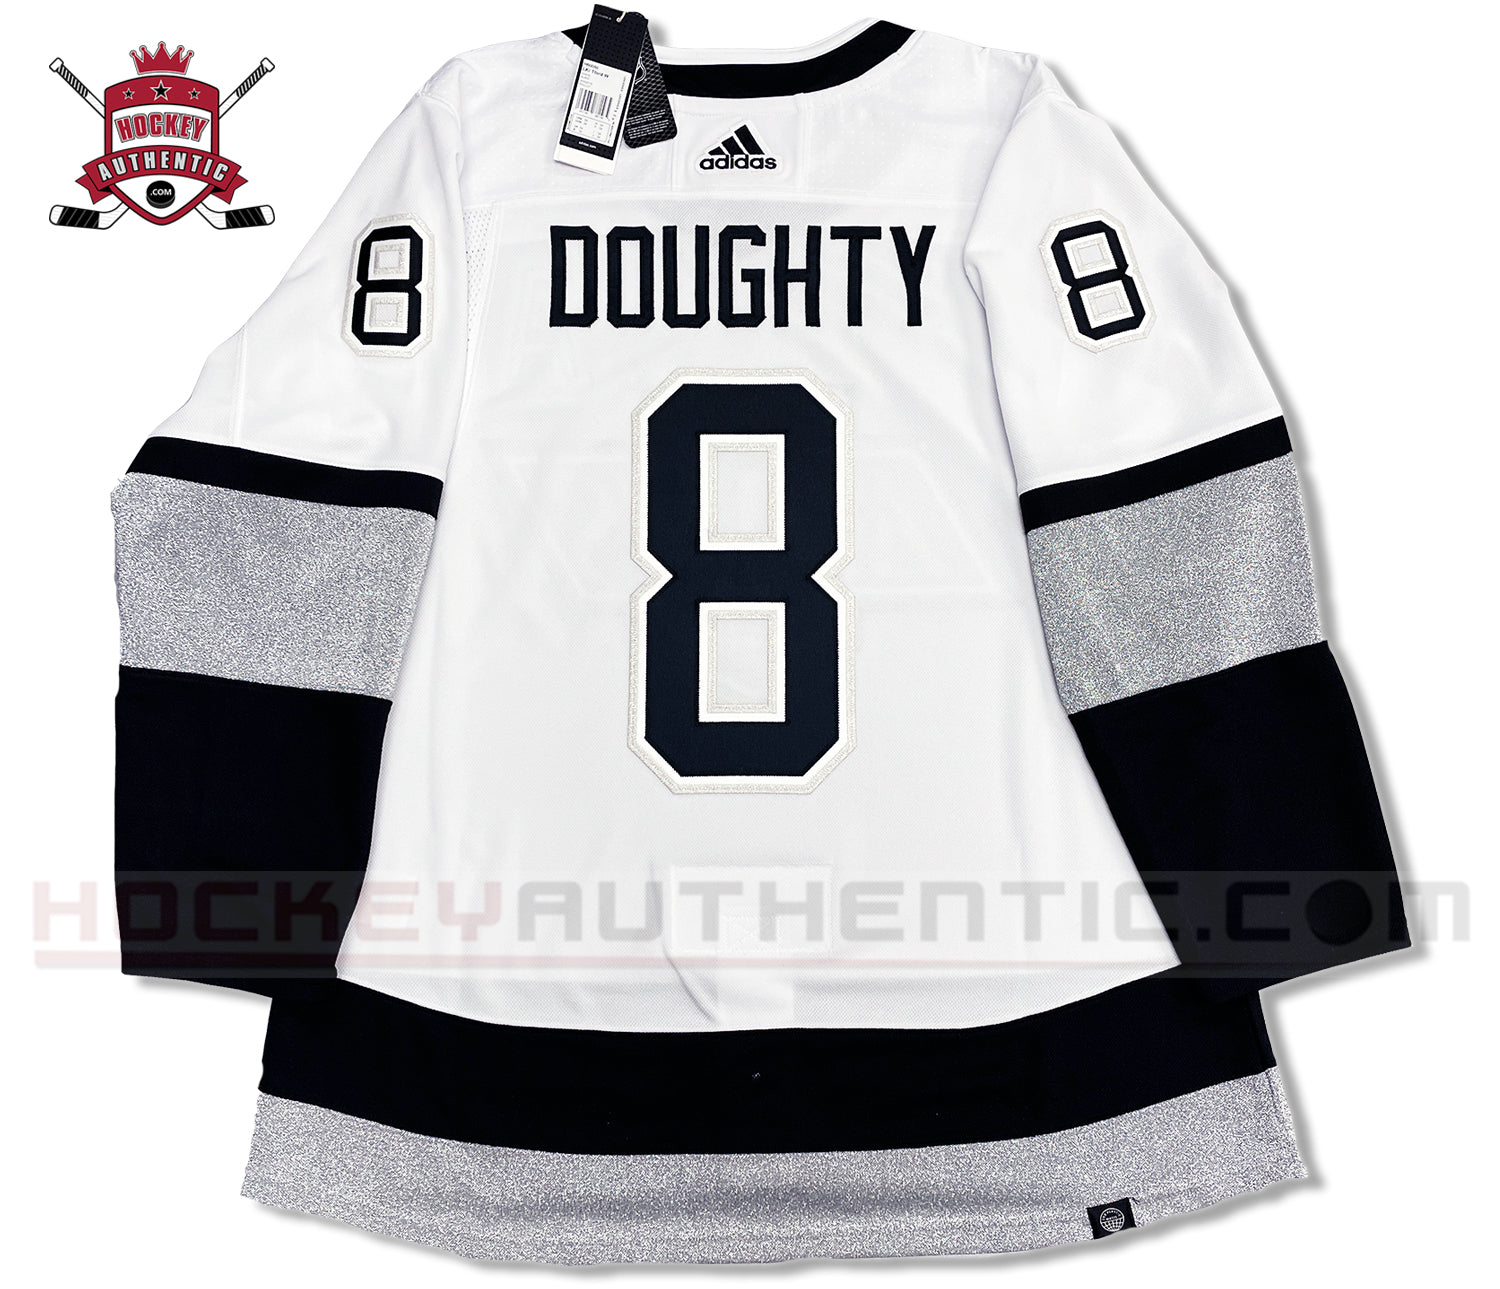 Drew Doughty Los Angeles Kings Autographed Adidas Authentic Hockey